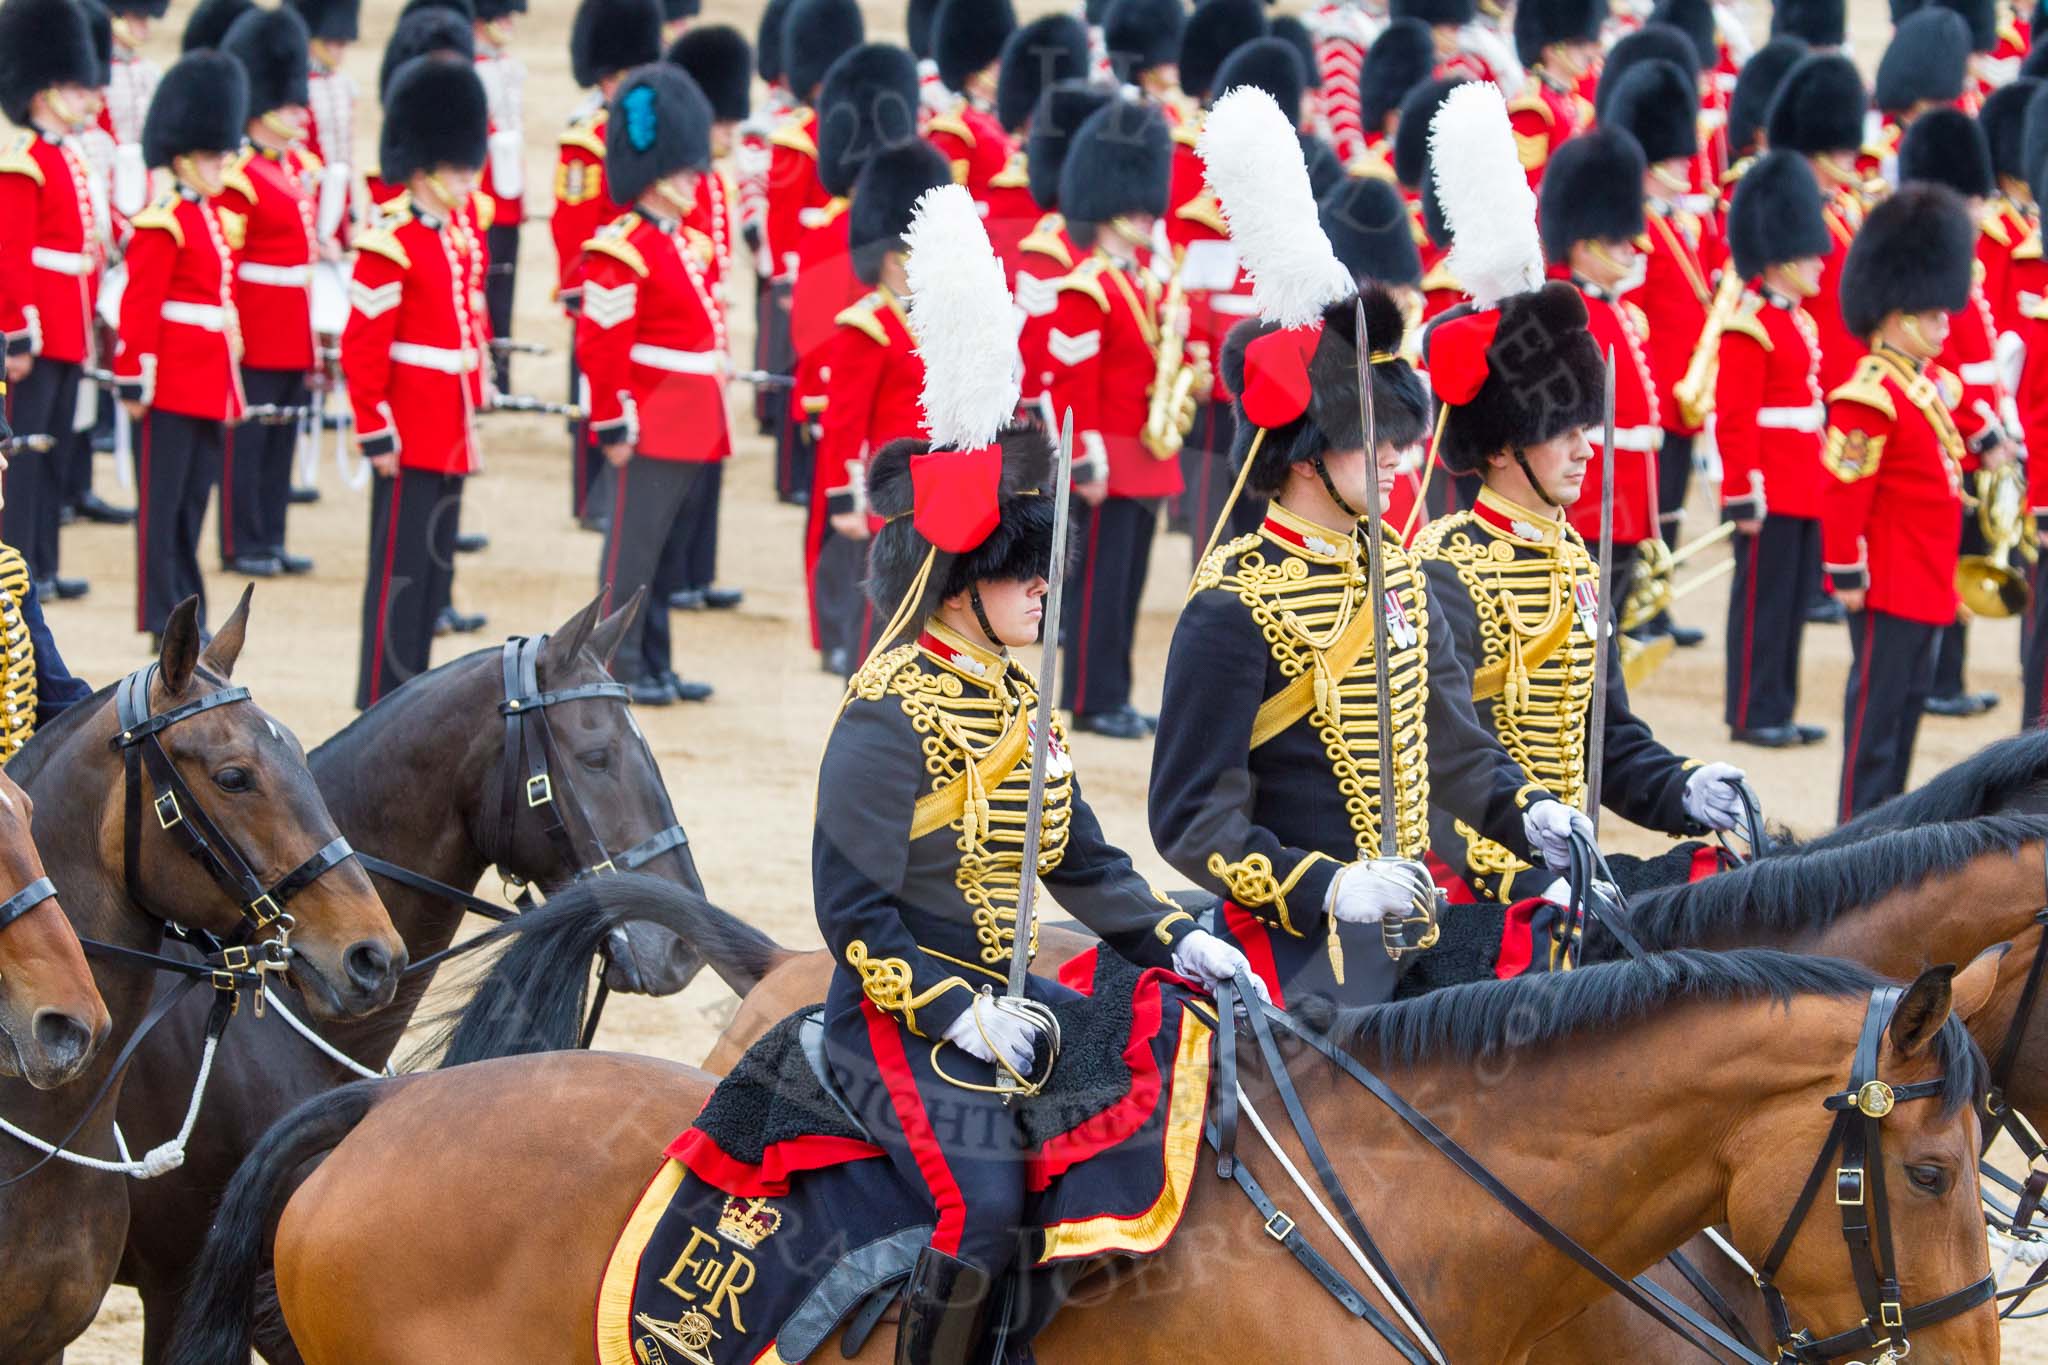 Trooping the Colour 2014.
Horse Guards Parade, Westminster,
London SW1A,

United Kingdom,
on 14 June 2014 at 11:55, image #751